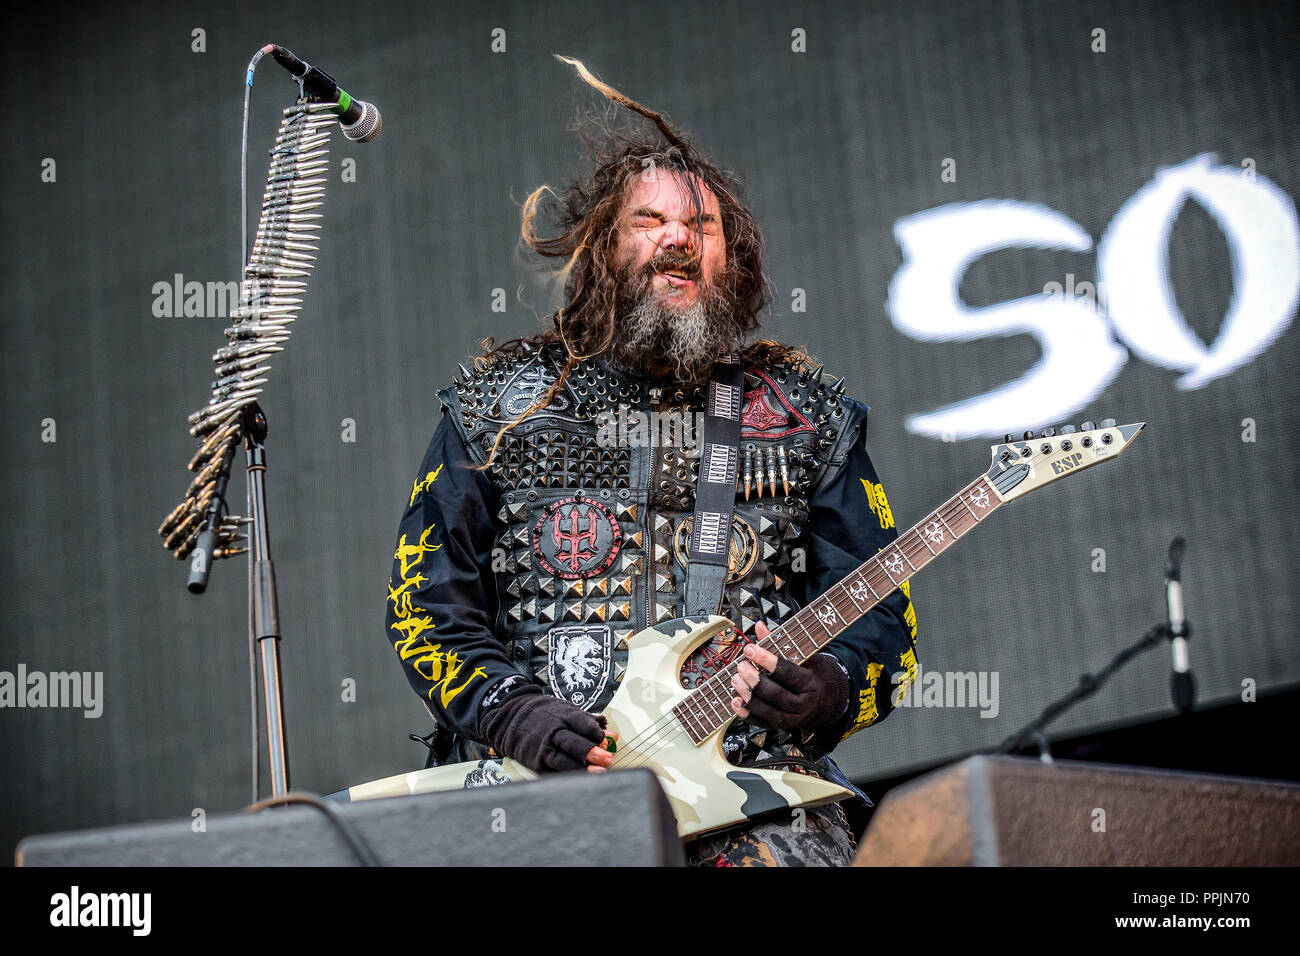 endelse Temmelig Kammer Norway, Halden - June 22, 2018. The American heavy metal band Soulfly  performs a concert during the Norwegian music metal festival Tons of Rock  2018 in Halden. Here vocalist and guitarist Max